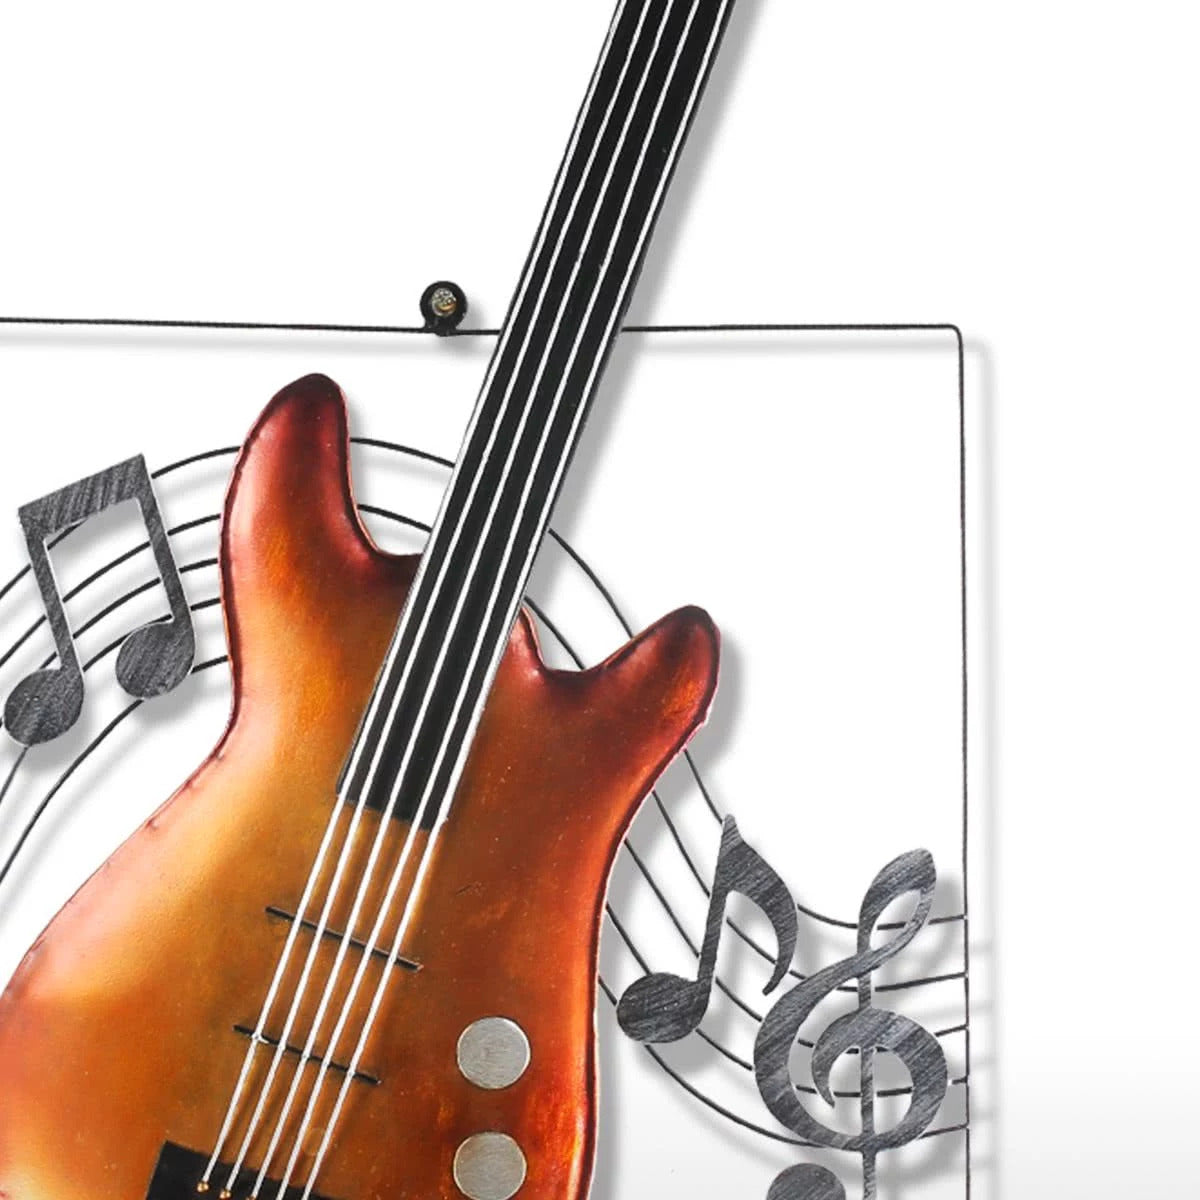 Musical Instrument Wall Art with Guitar